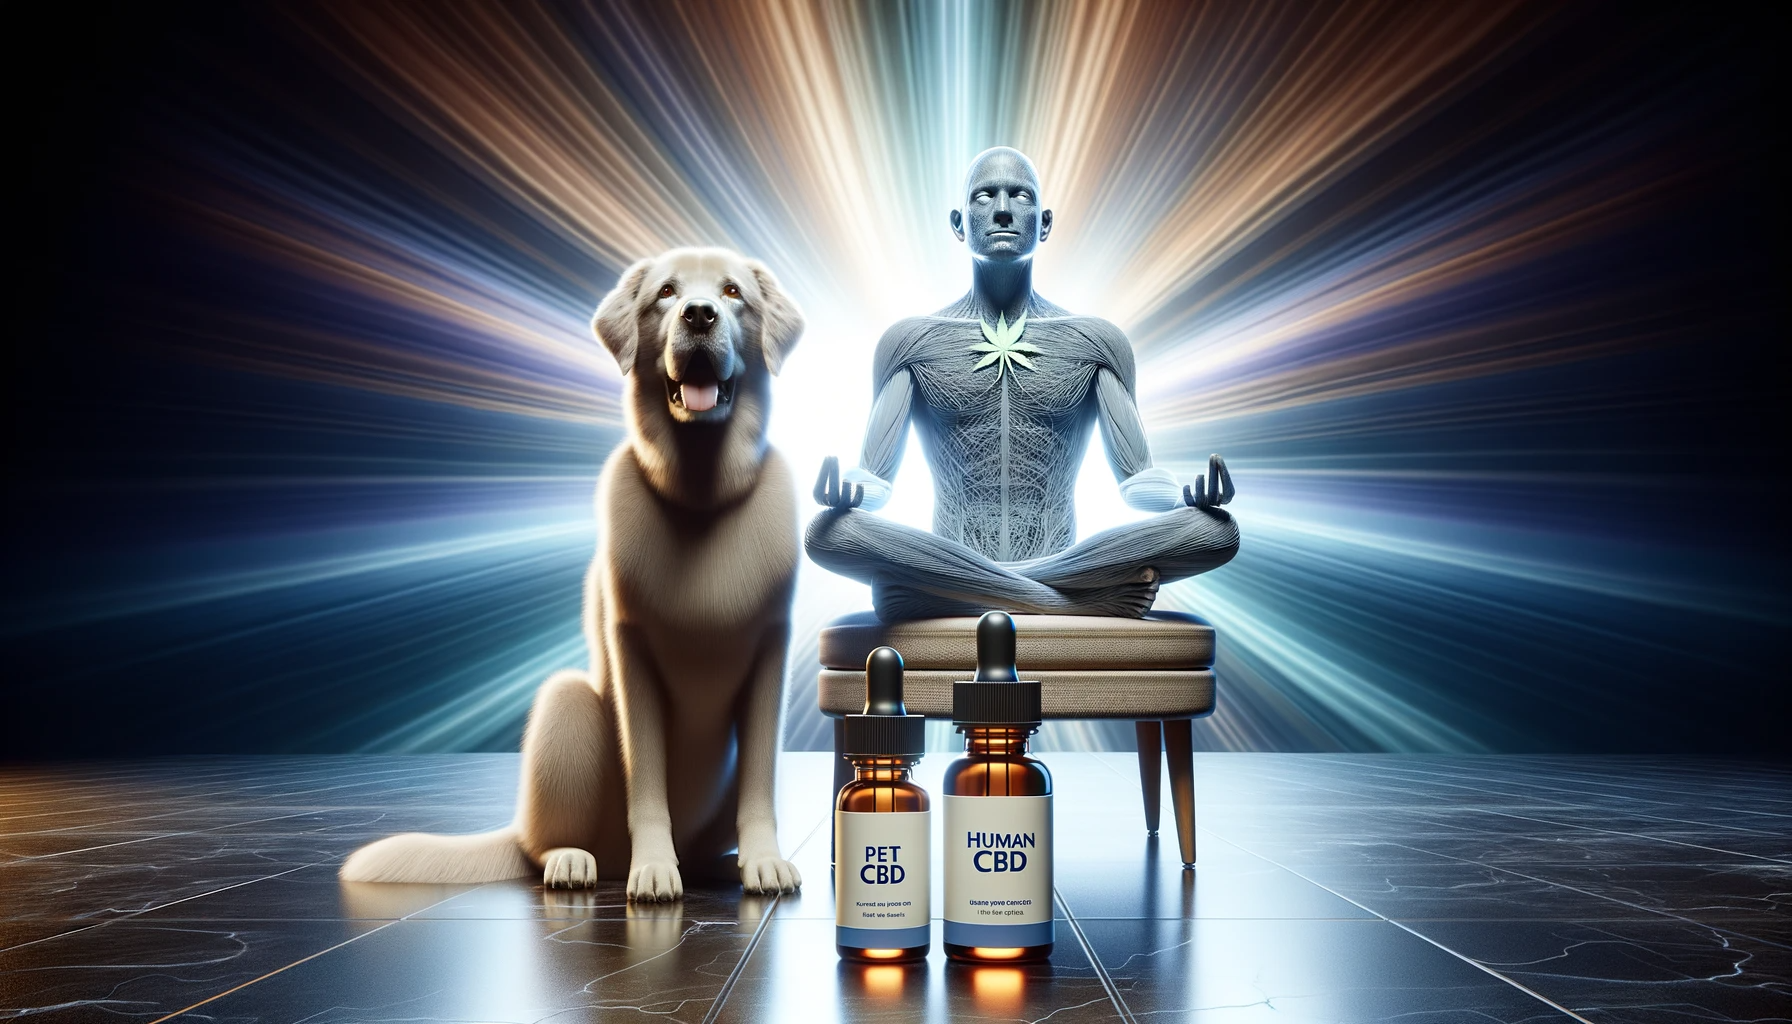 Hyper-realistic photo of a serene dog and a calm human figure sitting next to each other. In front of them are two distinct CBD bottles